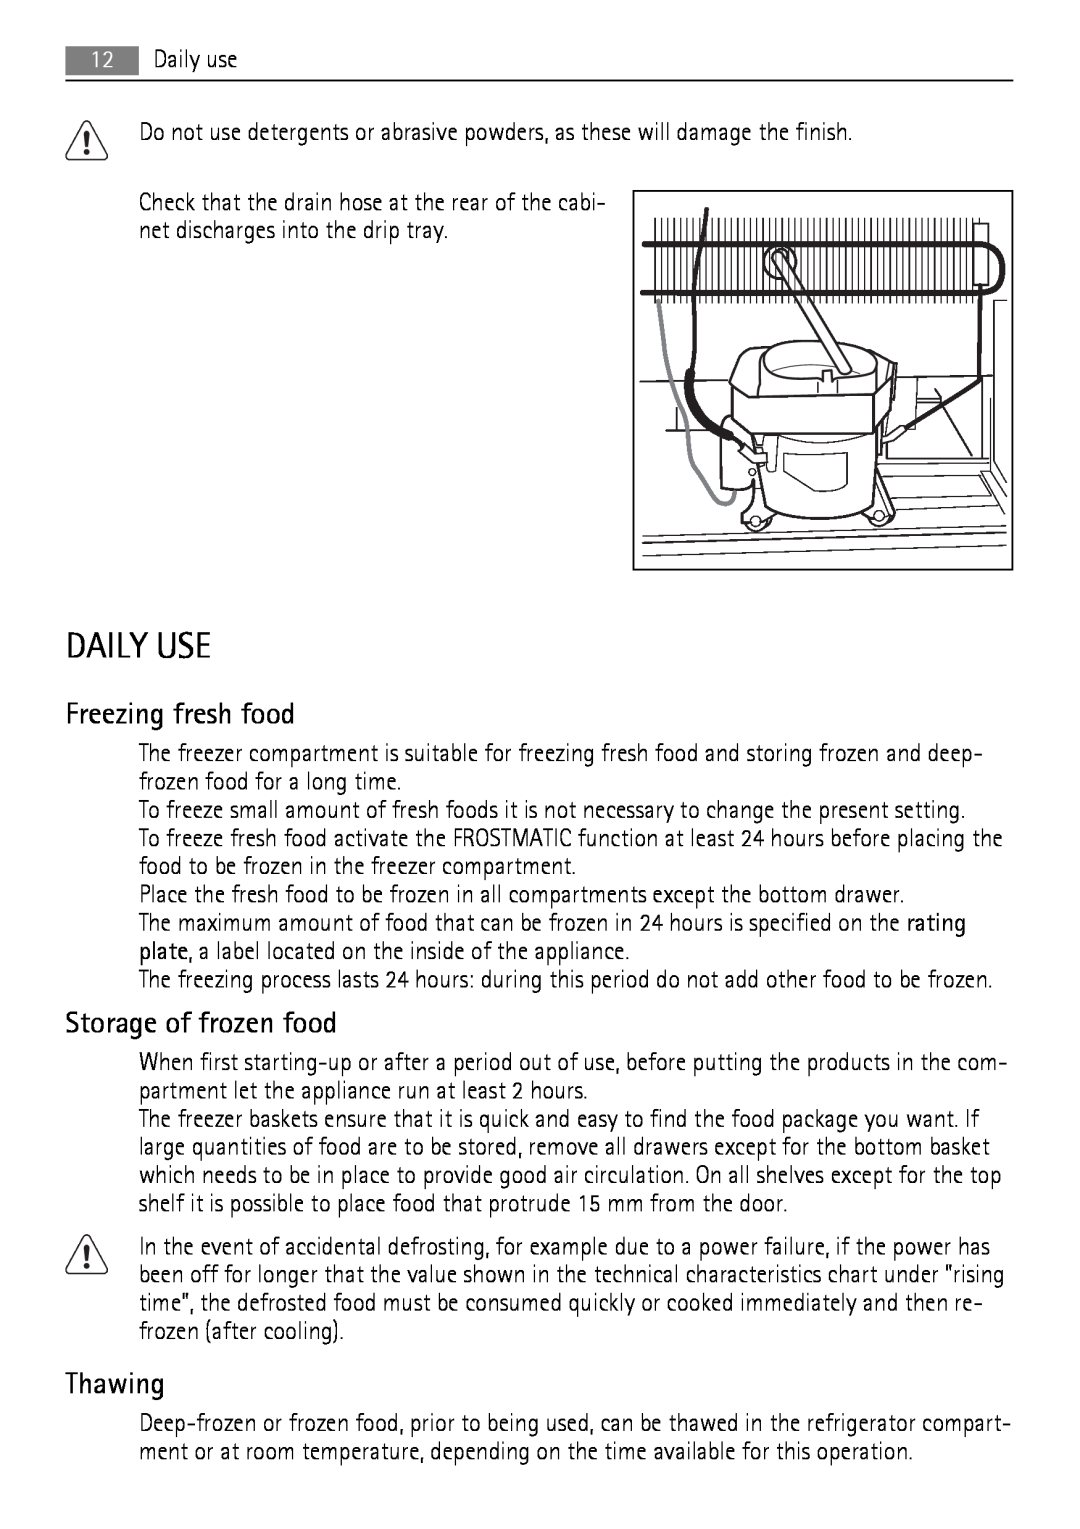 AEG A92860GNB0 user manual Daily Use, Freezing fresh food, Storage of frozen food, Thawing 